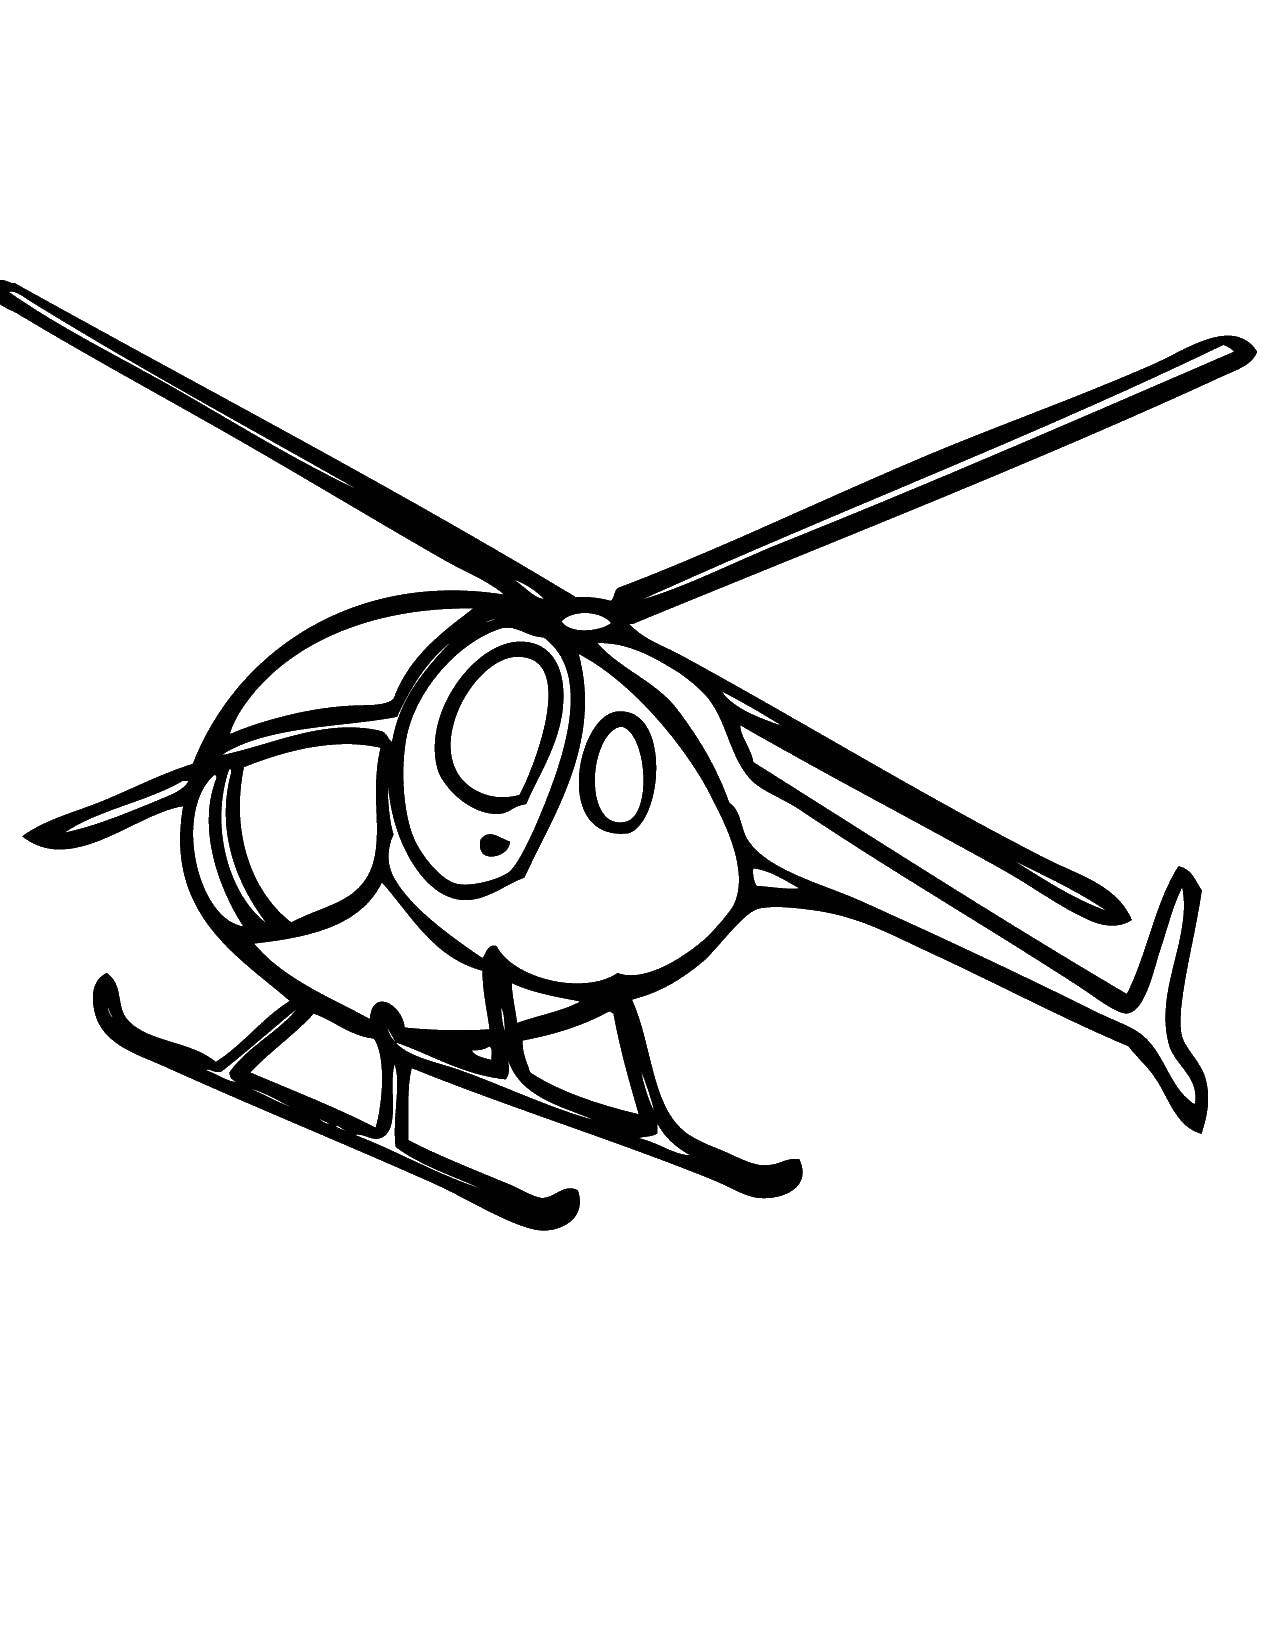 Coloring Helicopter.. Category Helicopters. Tags:  helicopters, planes, transport.